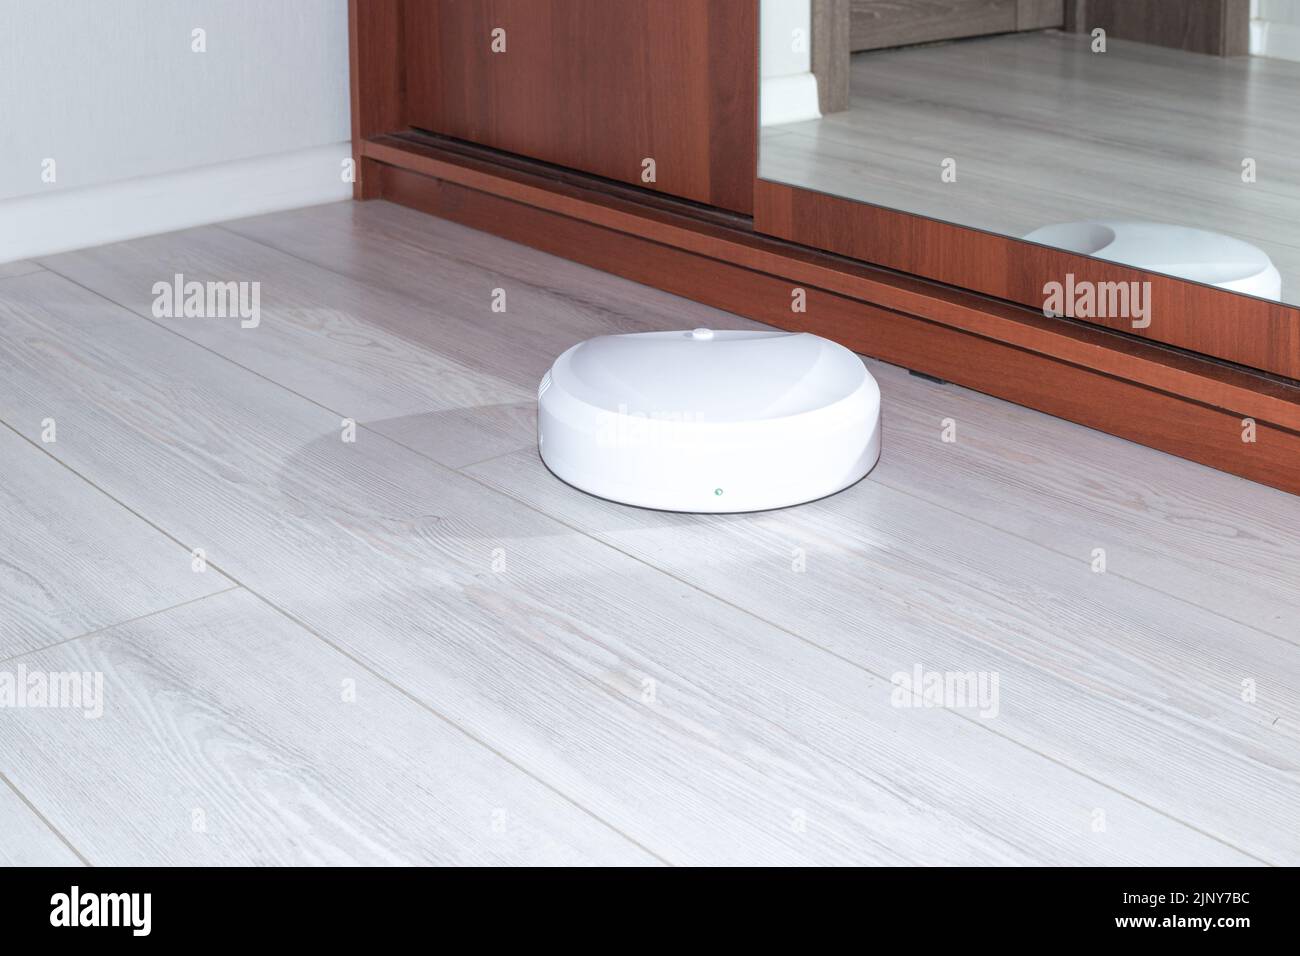 A small robot vacuum cleaner works on the floor, vacuuming the laminate. House cleaning, smart gadgets. Stock Photo